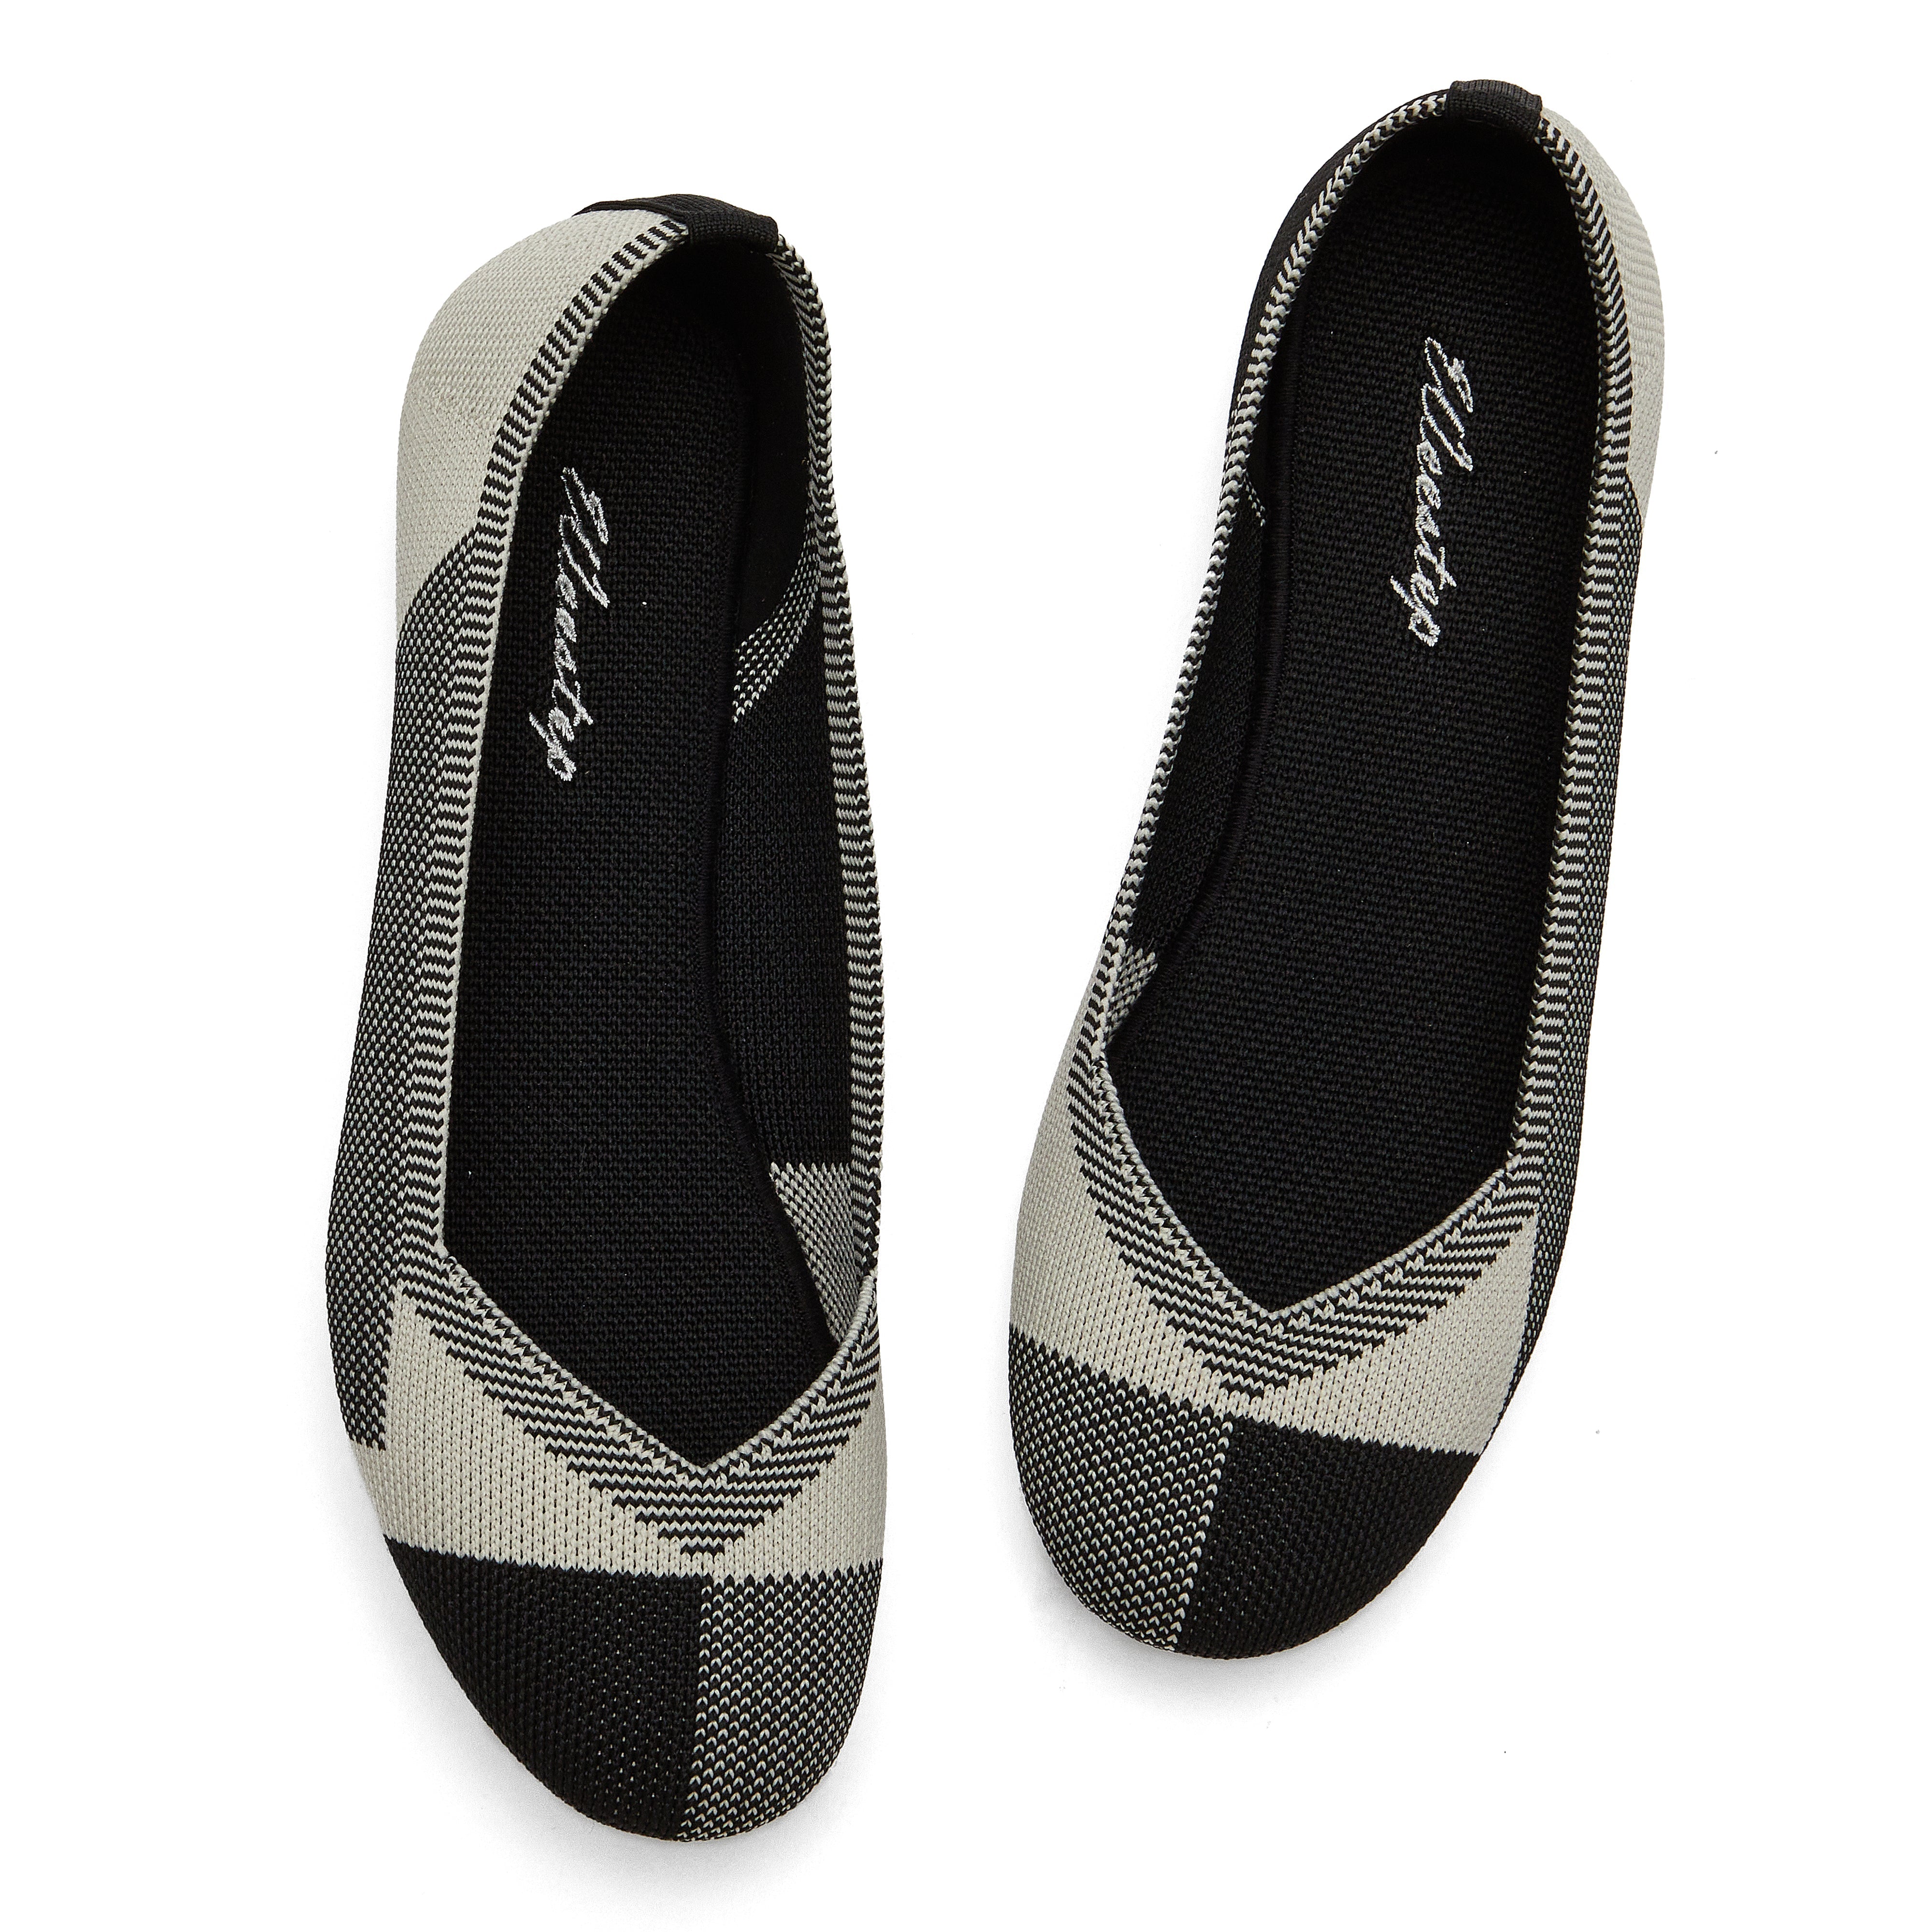 New Women Knit Woven Pointed Toe Flats